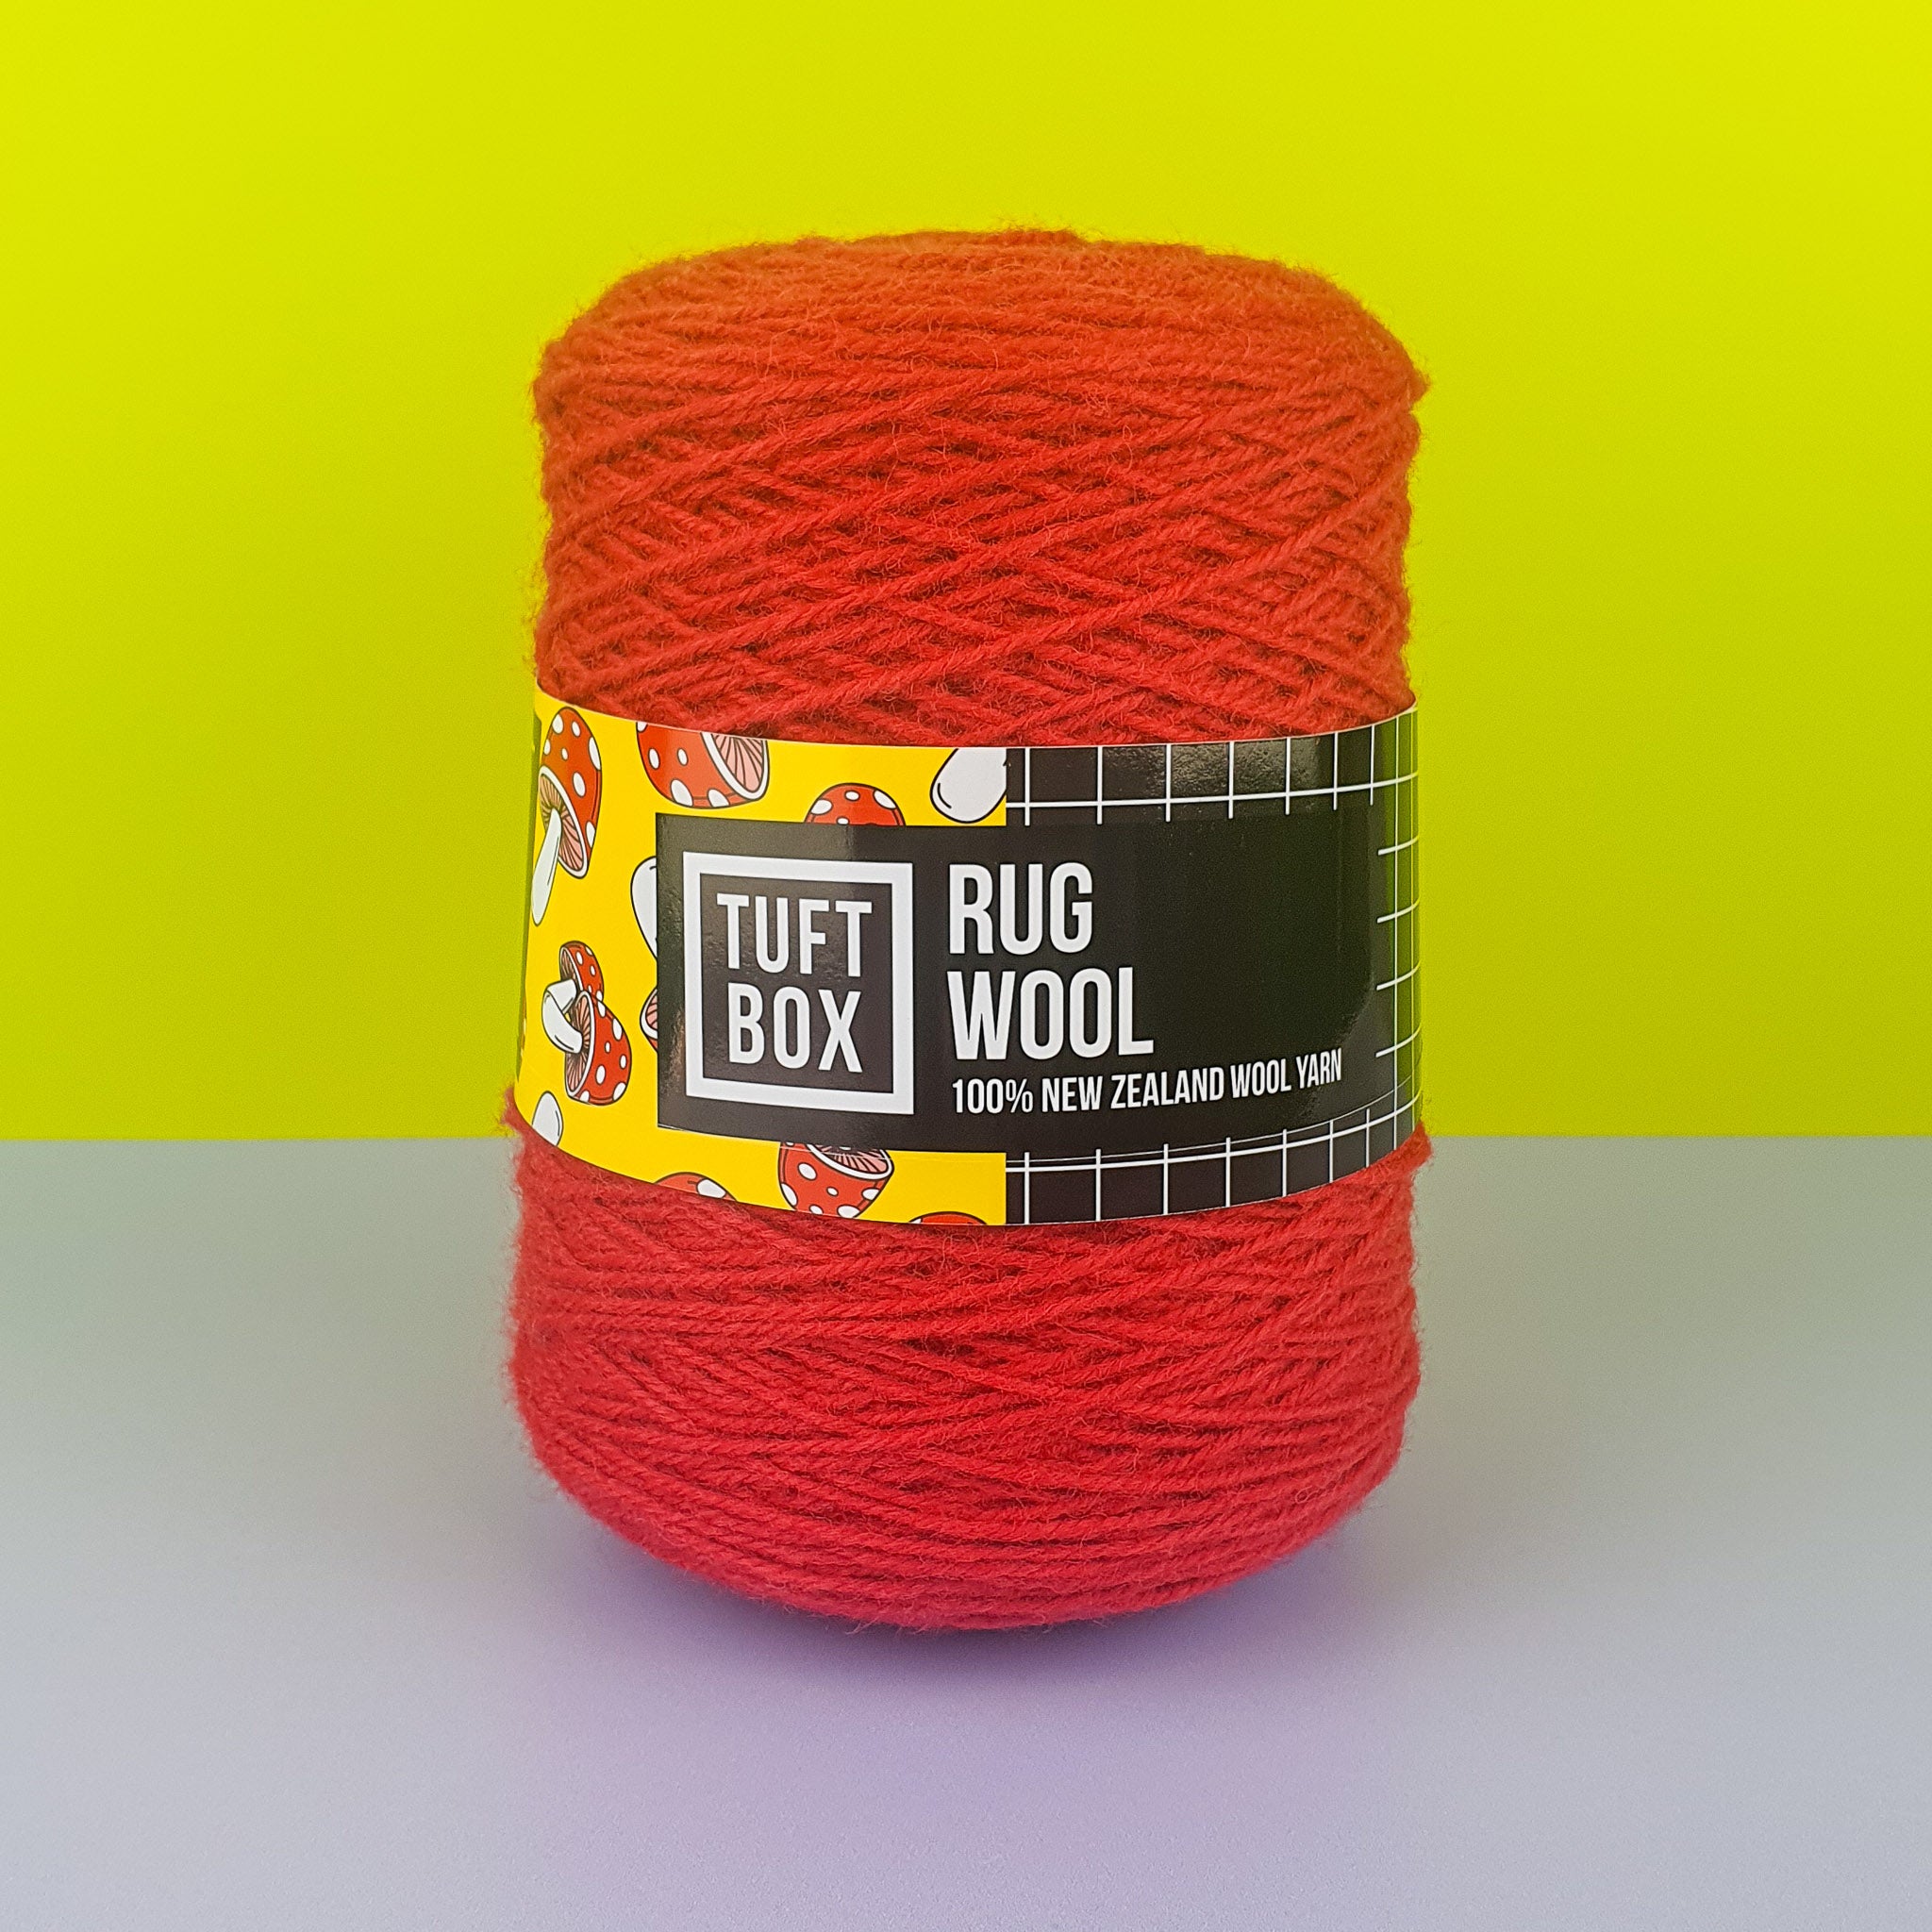 Tuftbox Rug Wool Cone Red